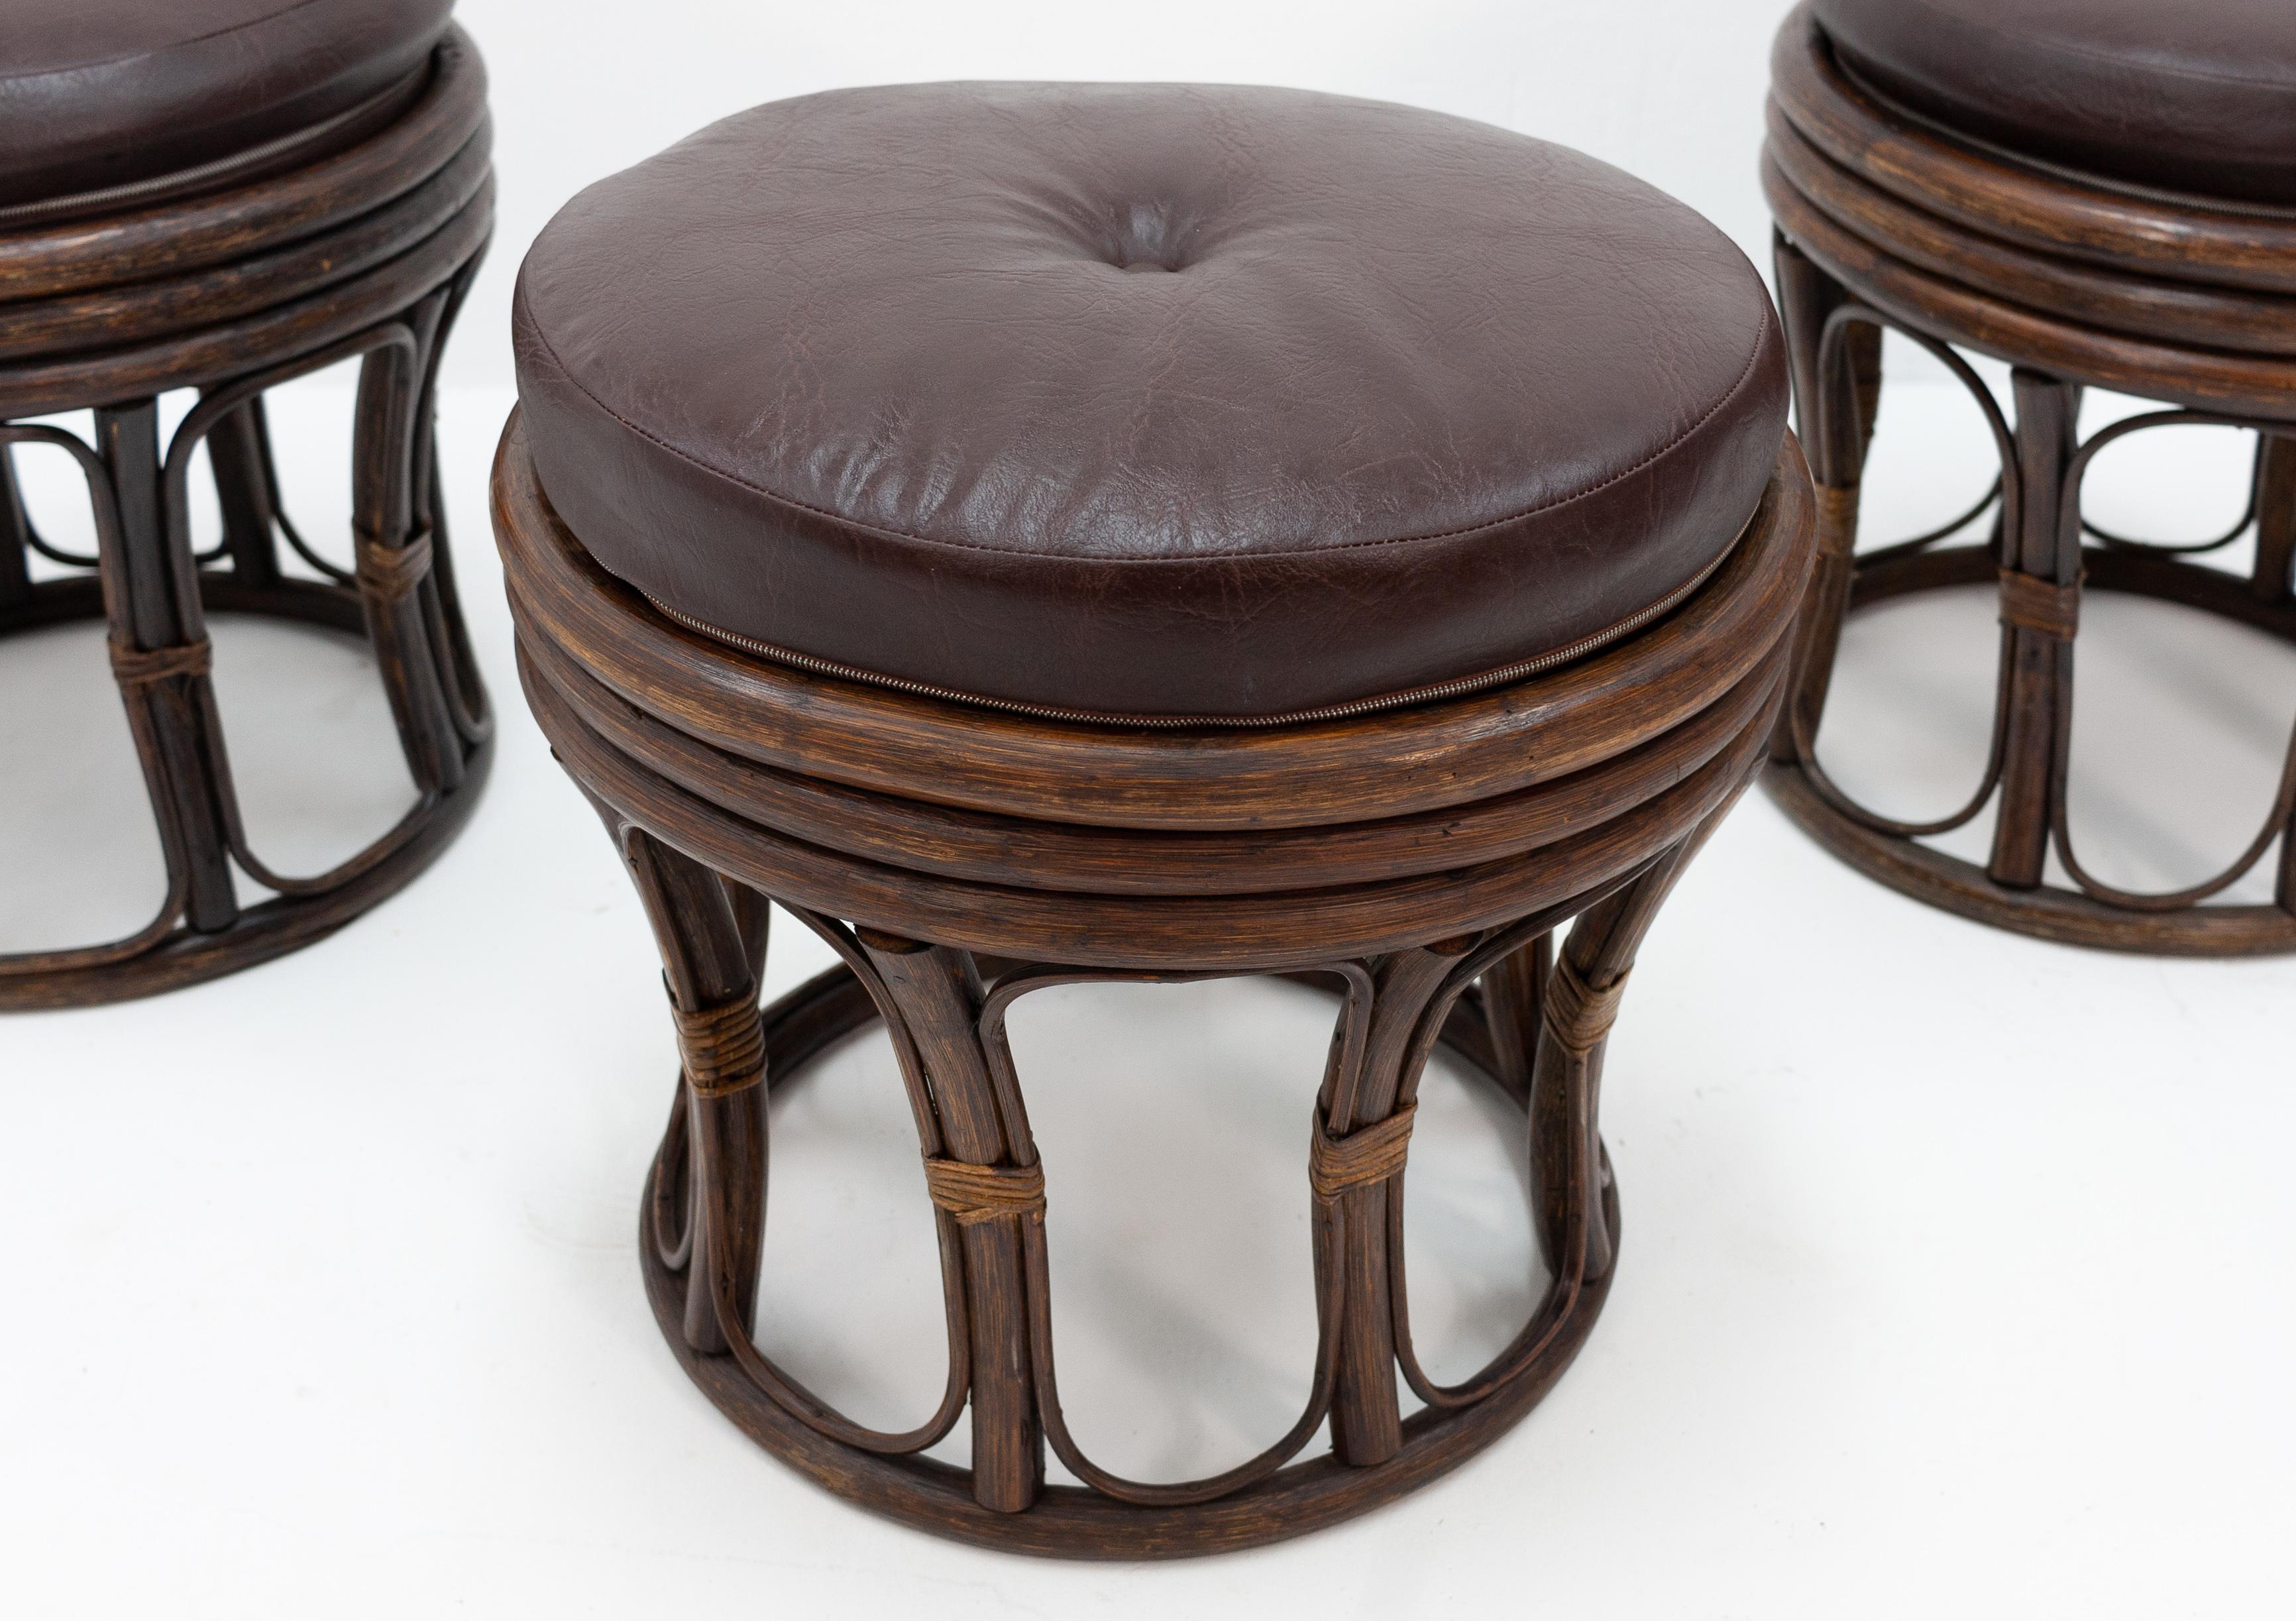 Three identical rattan seating stools .With a faux leather upholstery, brown color. Nice and very useful
stools, 1970s.